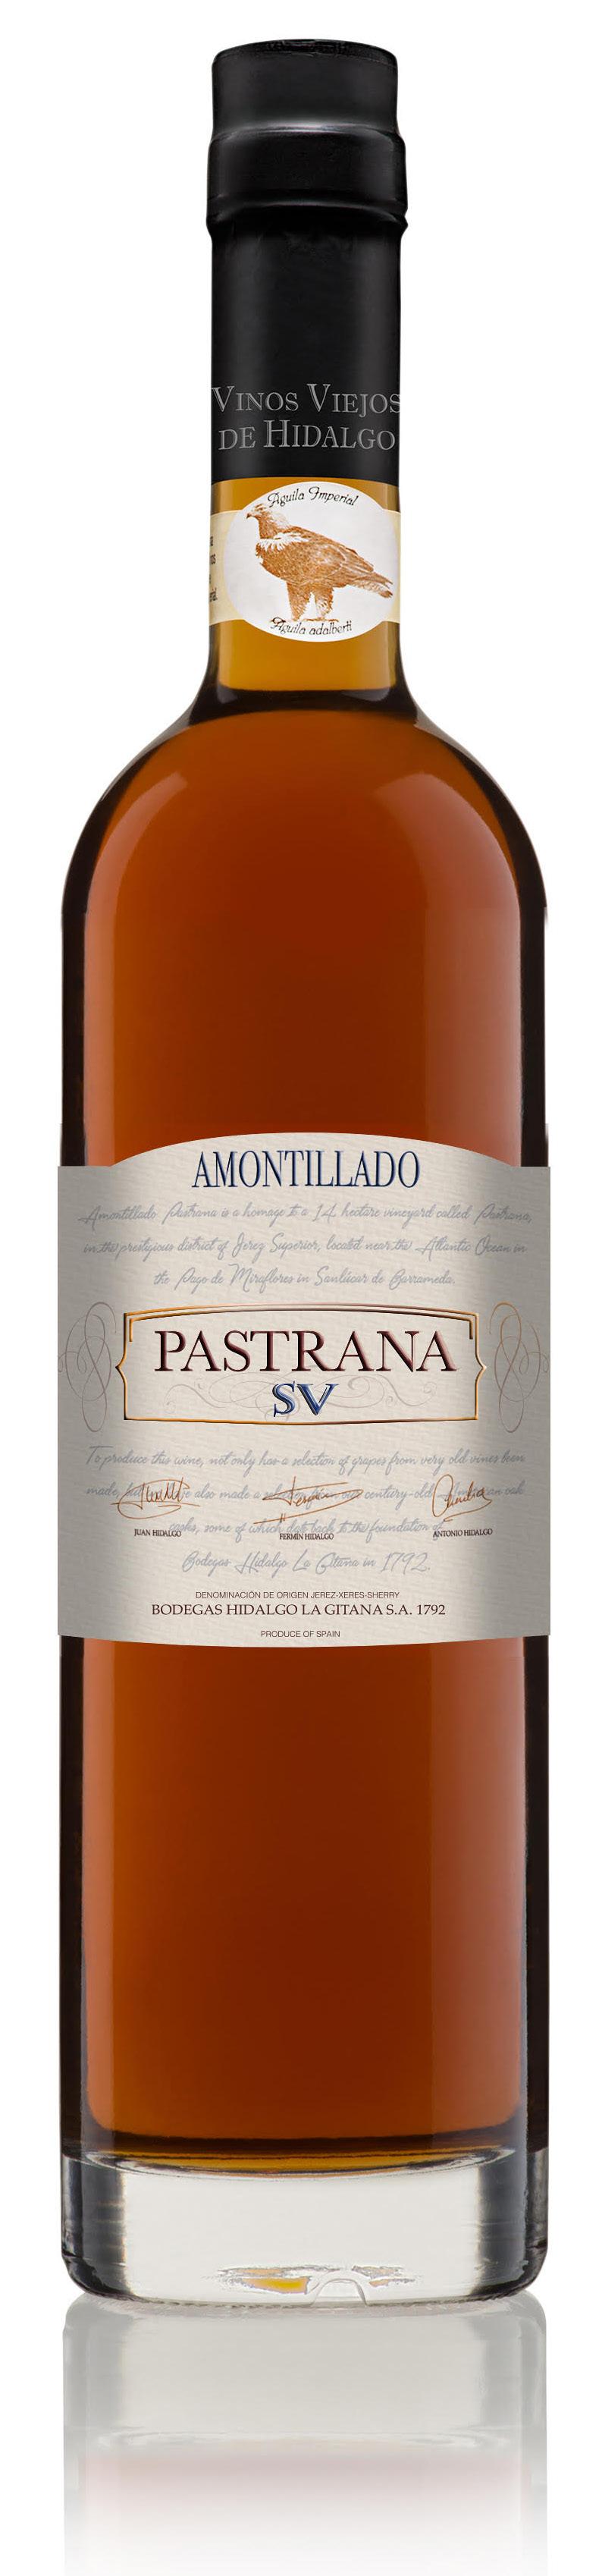 AMONTILLADO PASTRANA SV D.O. Jerez-Xérès-Sherry 96 Parker Bodegas Hidalgo la Gitana was founded in 1792 and since then the company has passed from father to son.